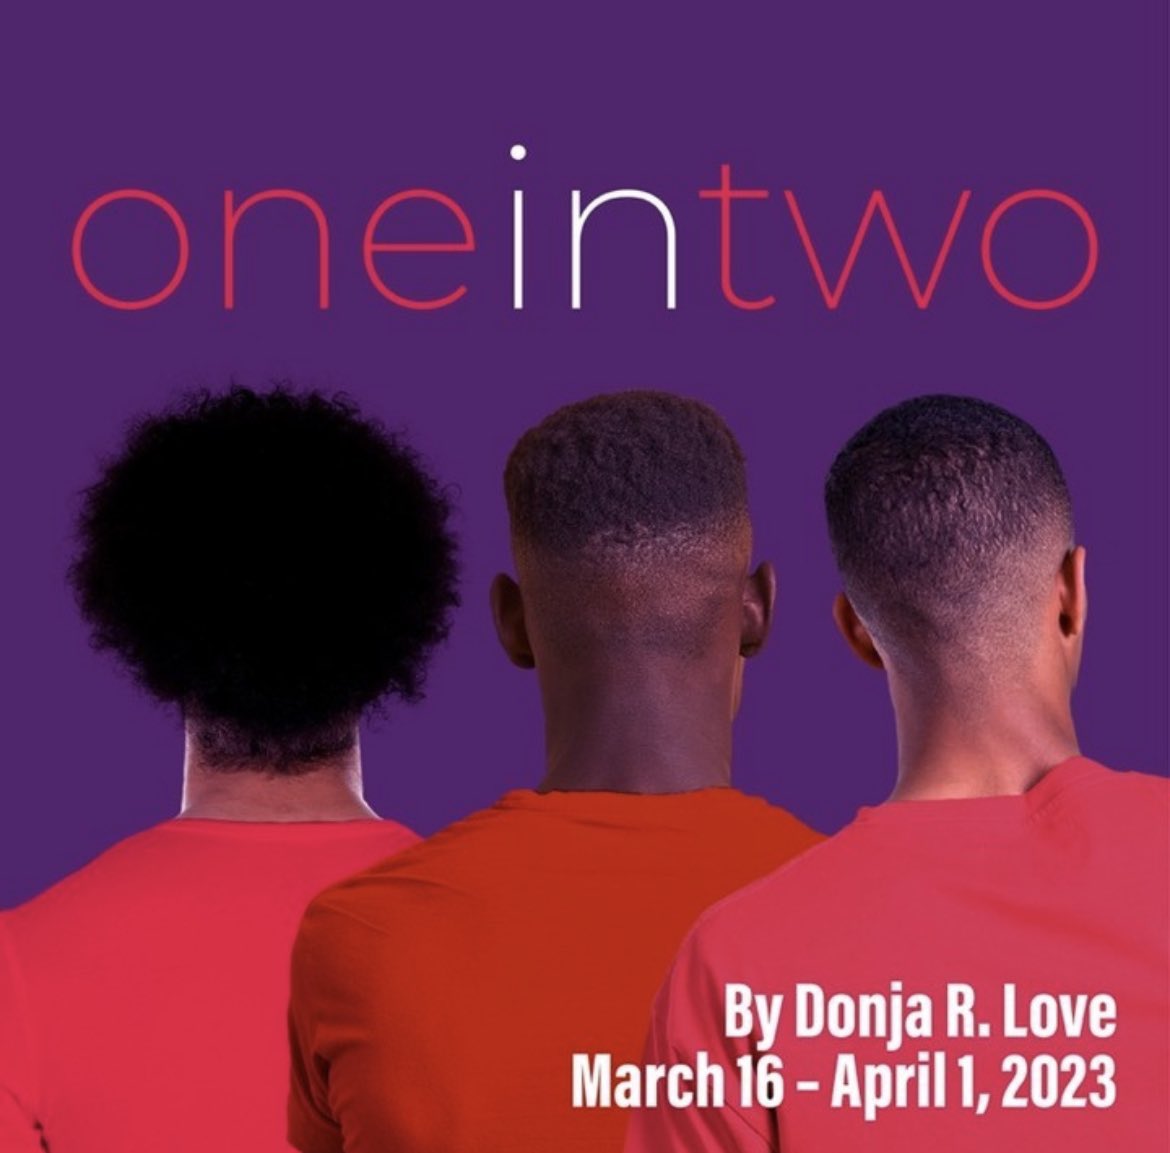 one in two! This week we’re on Thursday, Friday, Saturday, Sunday, and Monday *industry night
 #oneintwo #theater #Atlanta 
🎟️ outfronttheatre.com/event/one-in-t…